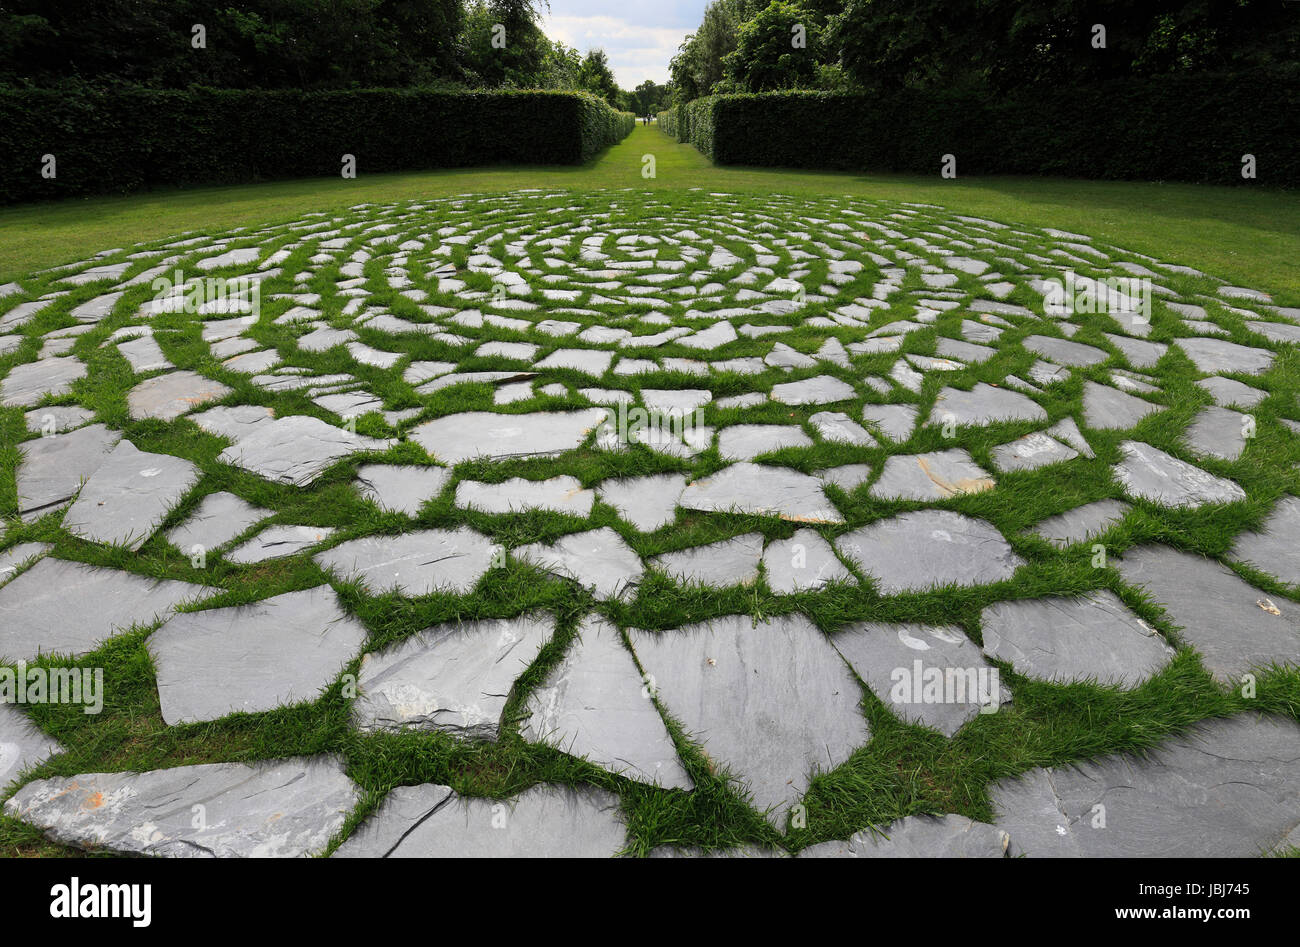 Richard Long's sculpture 'Wilderness Dreaming' seen at Houghton Hall in Norfolk. Stock Photo